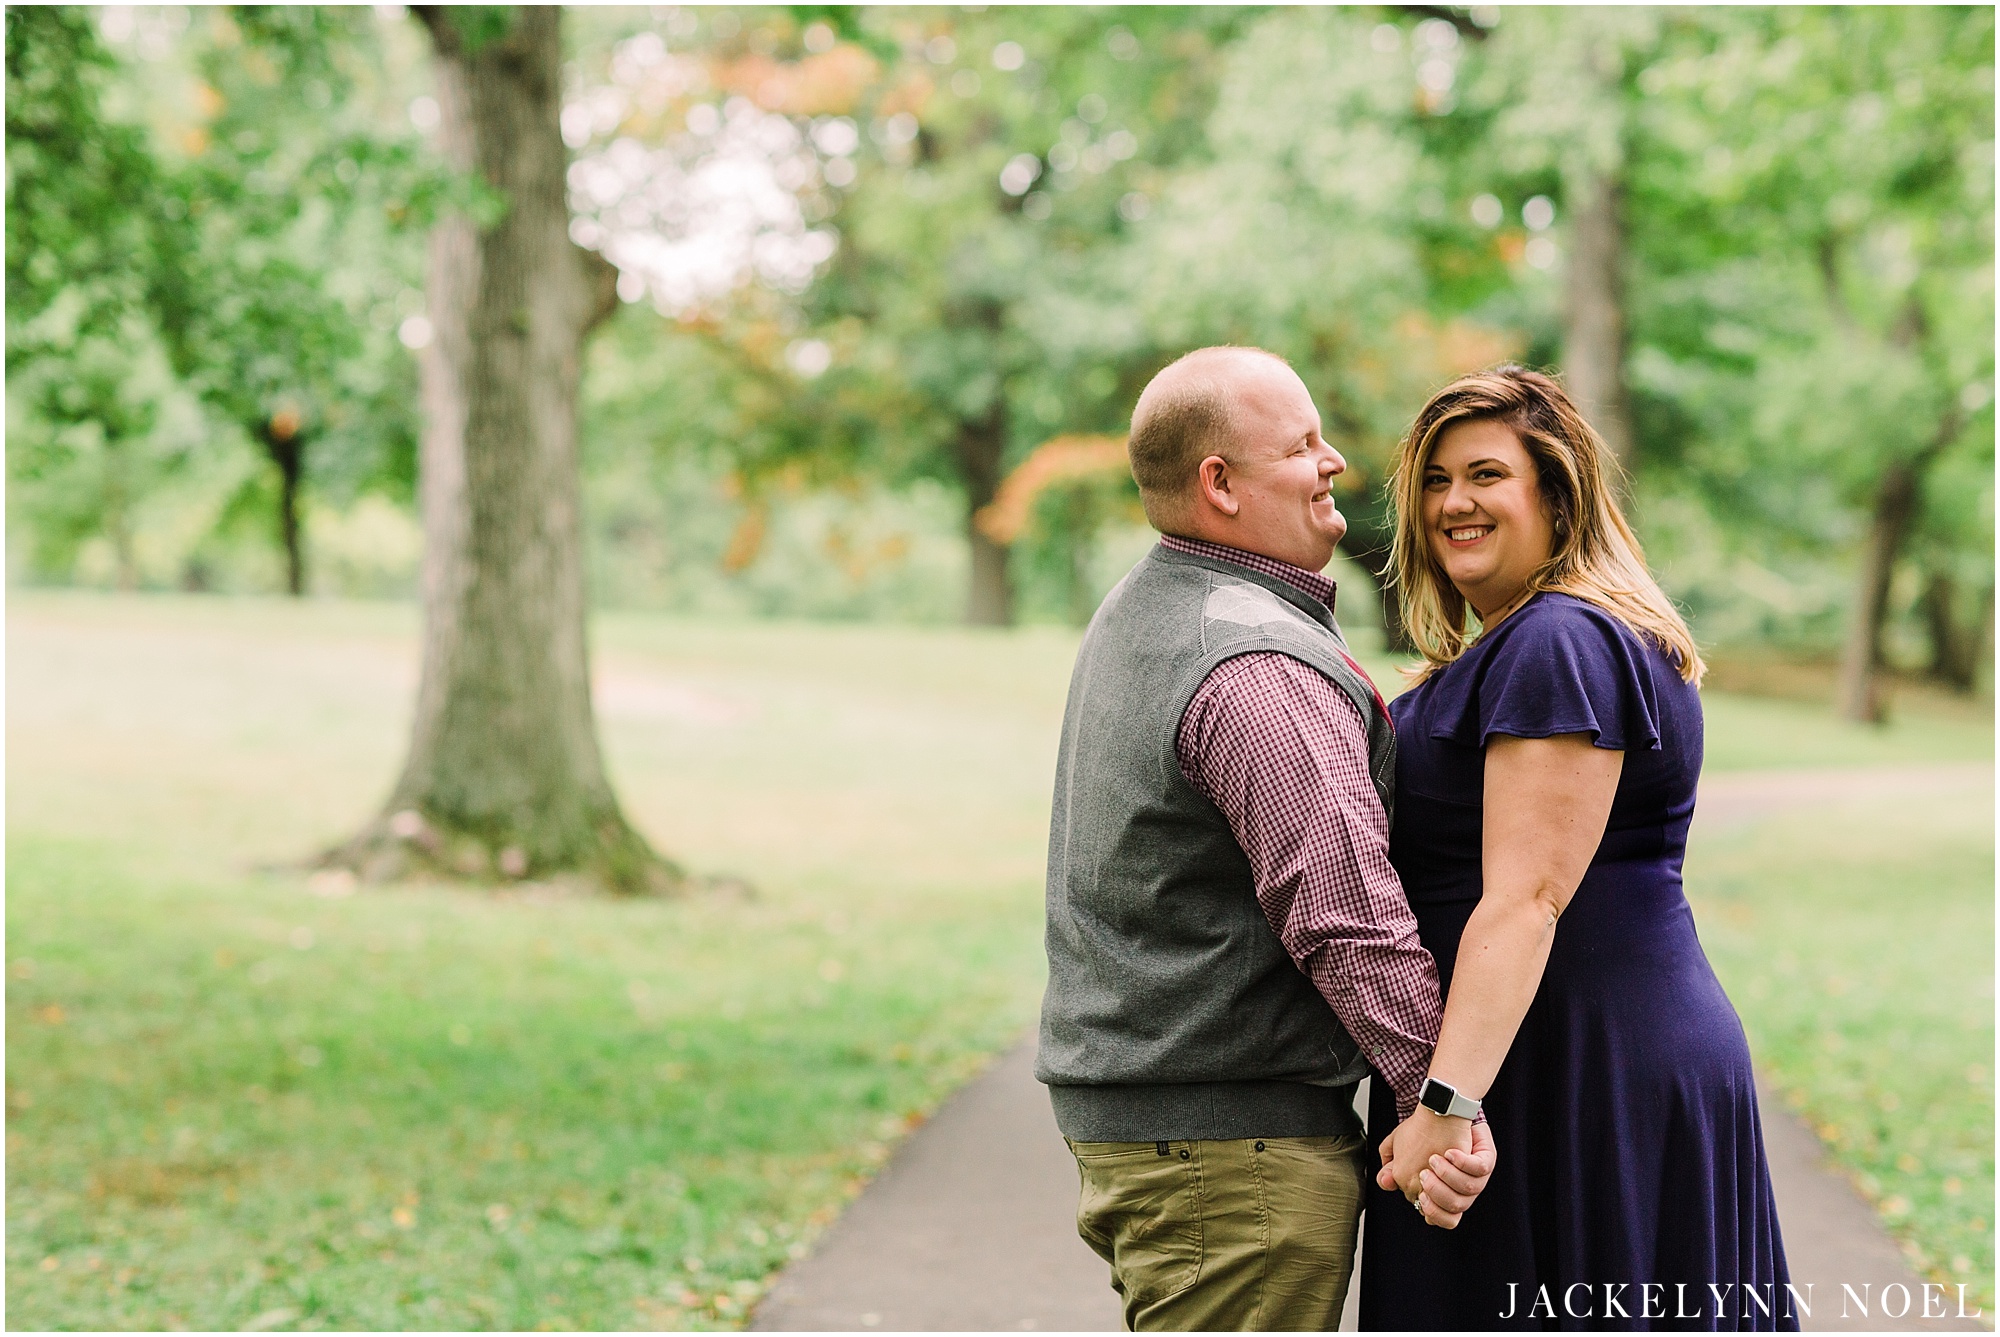 Heather & Tyler Engagement Session at Lafayette Park by Jackelynn Noel Photography